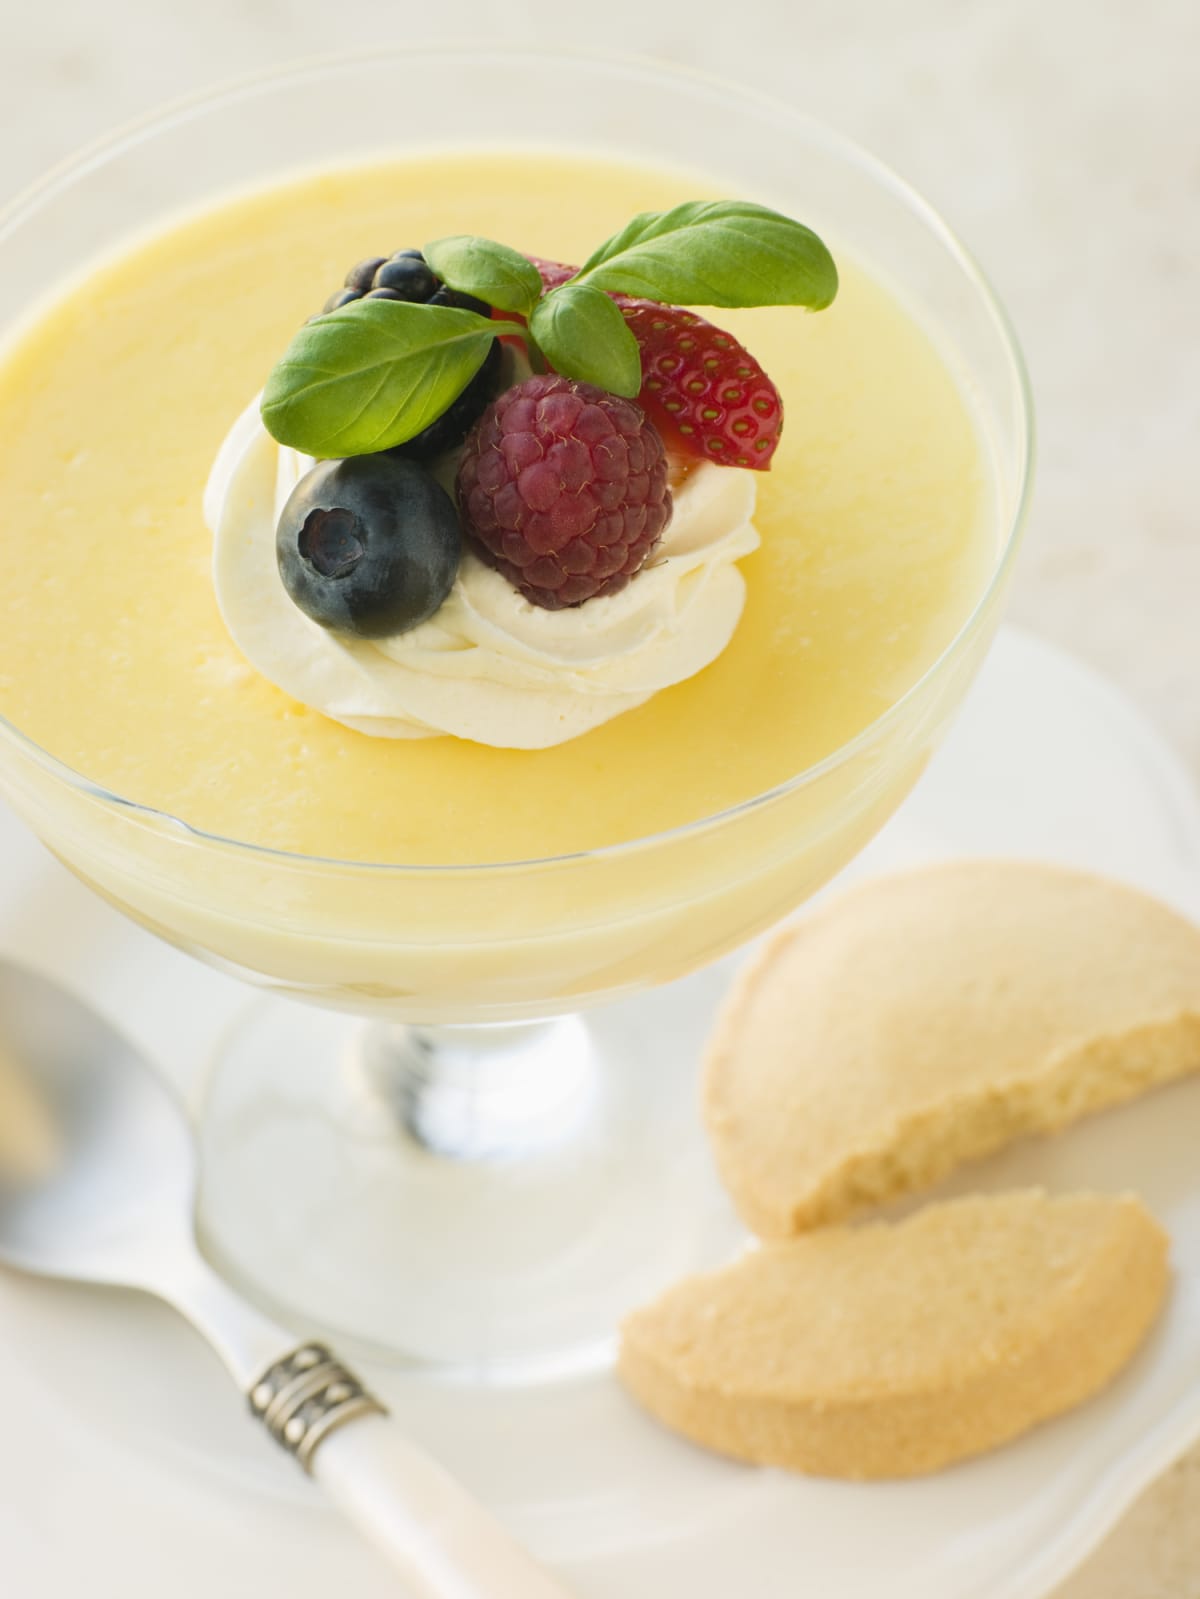 Lemon posset in a stemmed glass with berries